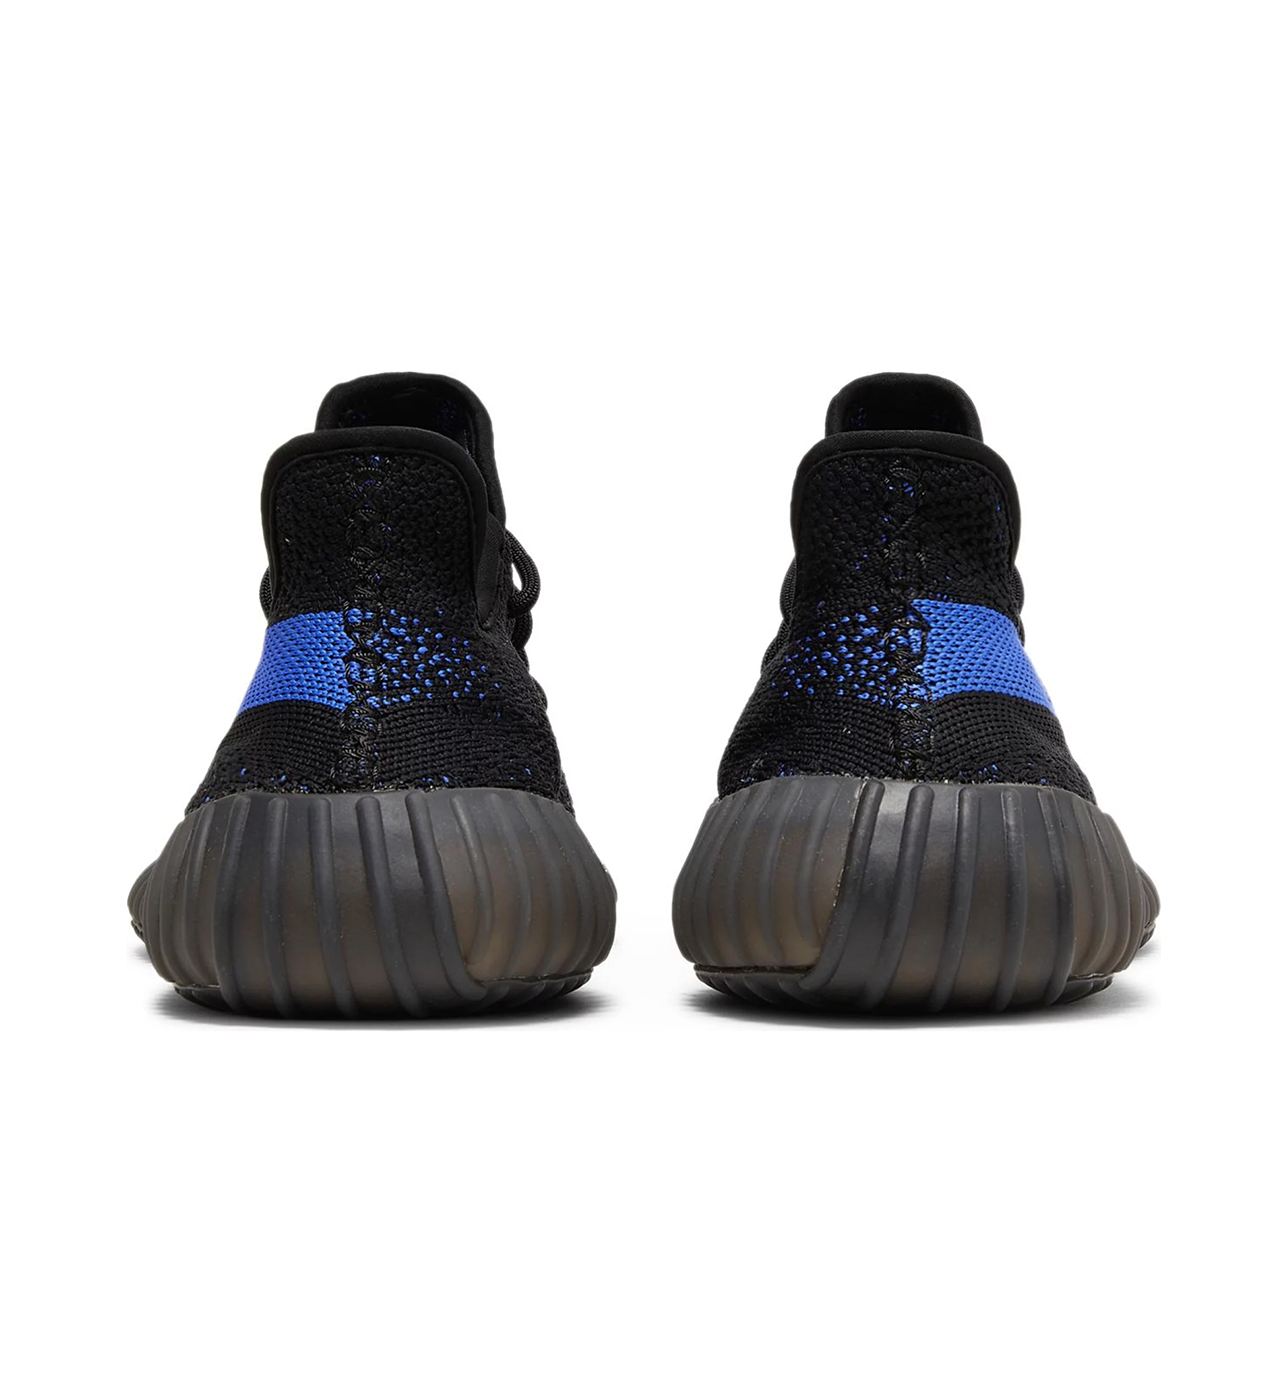 blue and black yeezy 350